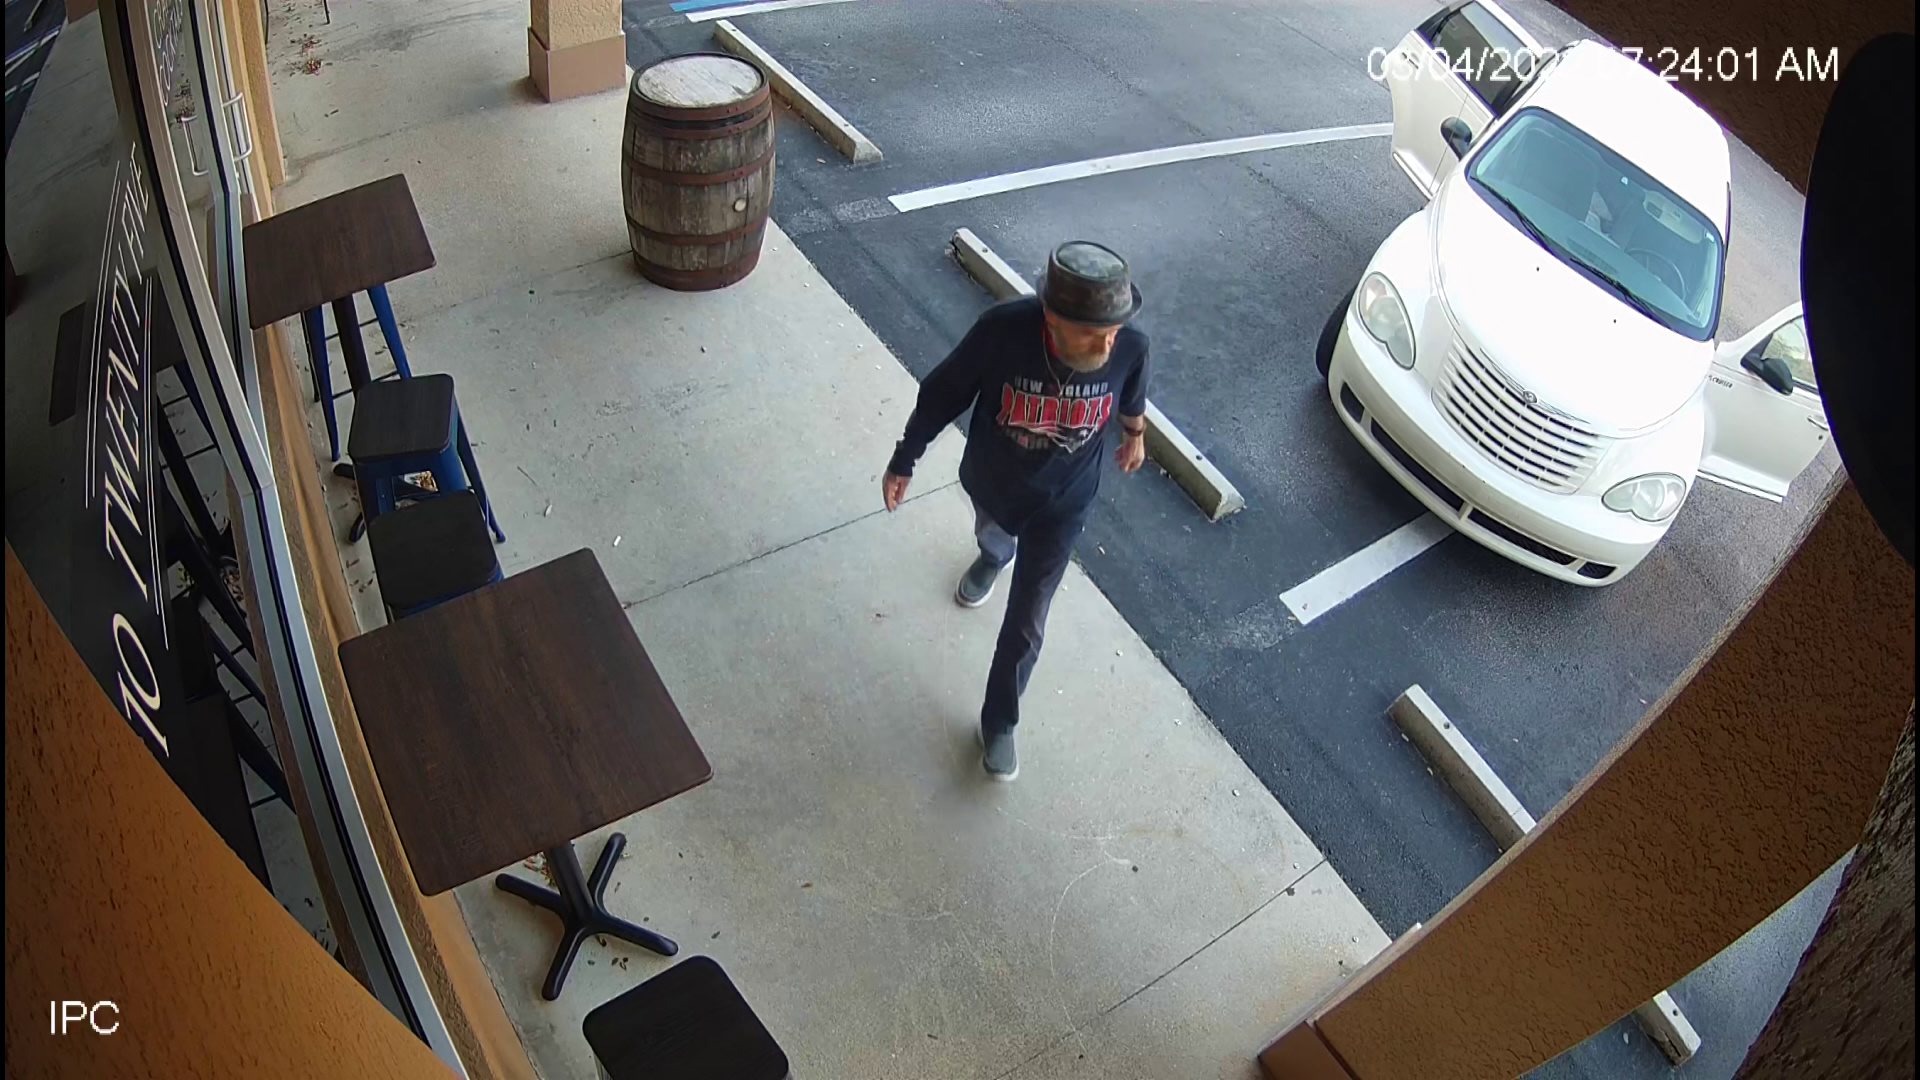 Cape Coral restaurant owner needs help identifying patio furniture thief